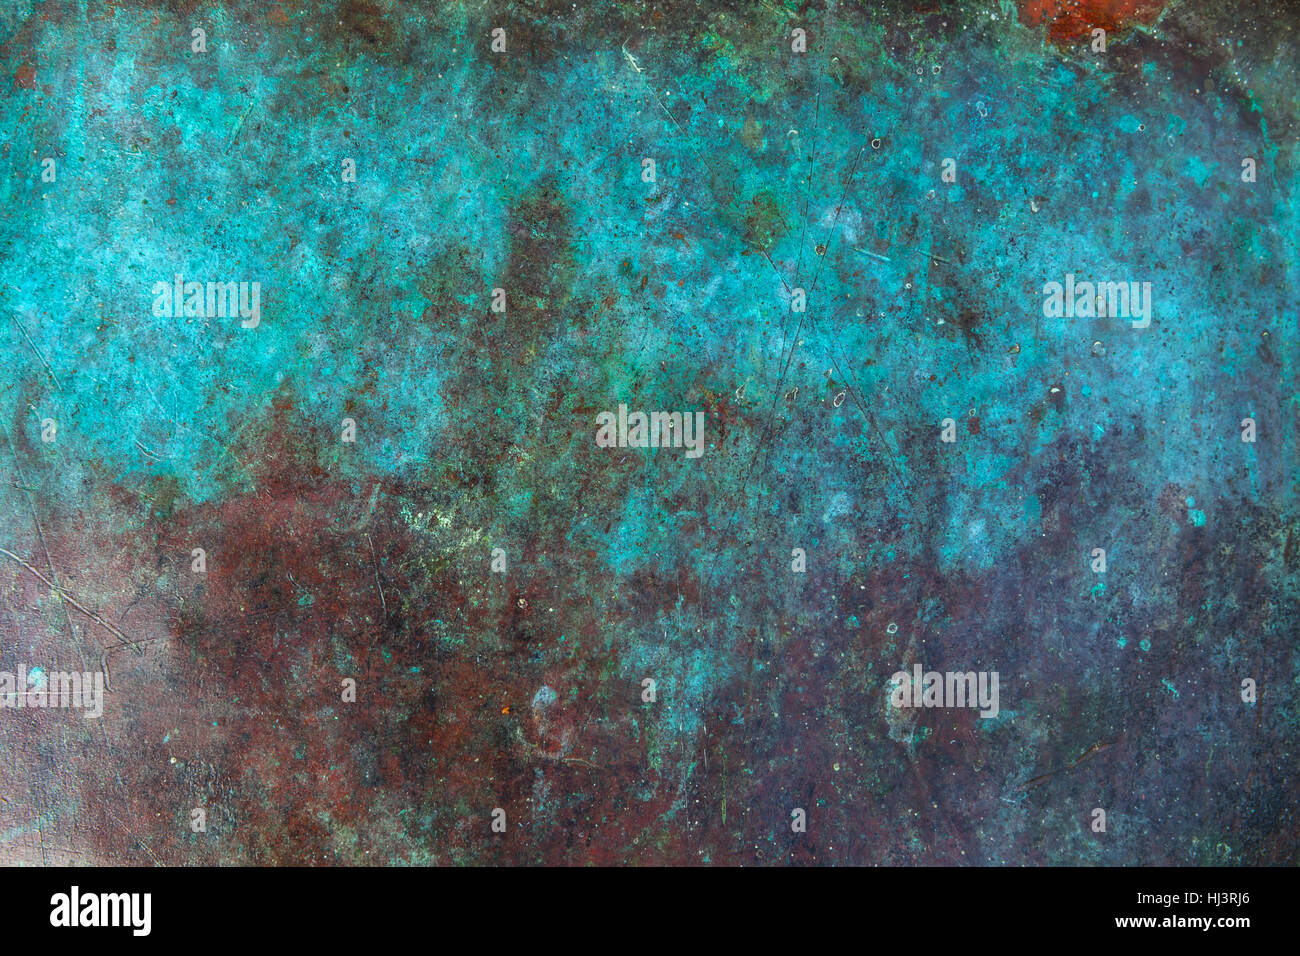 Background image of scratched antique copper vessel surface texture. Stock Photo